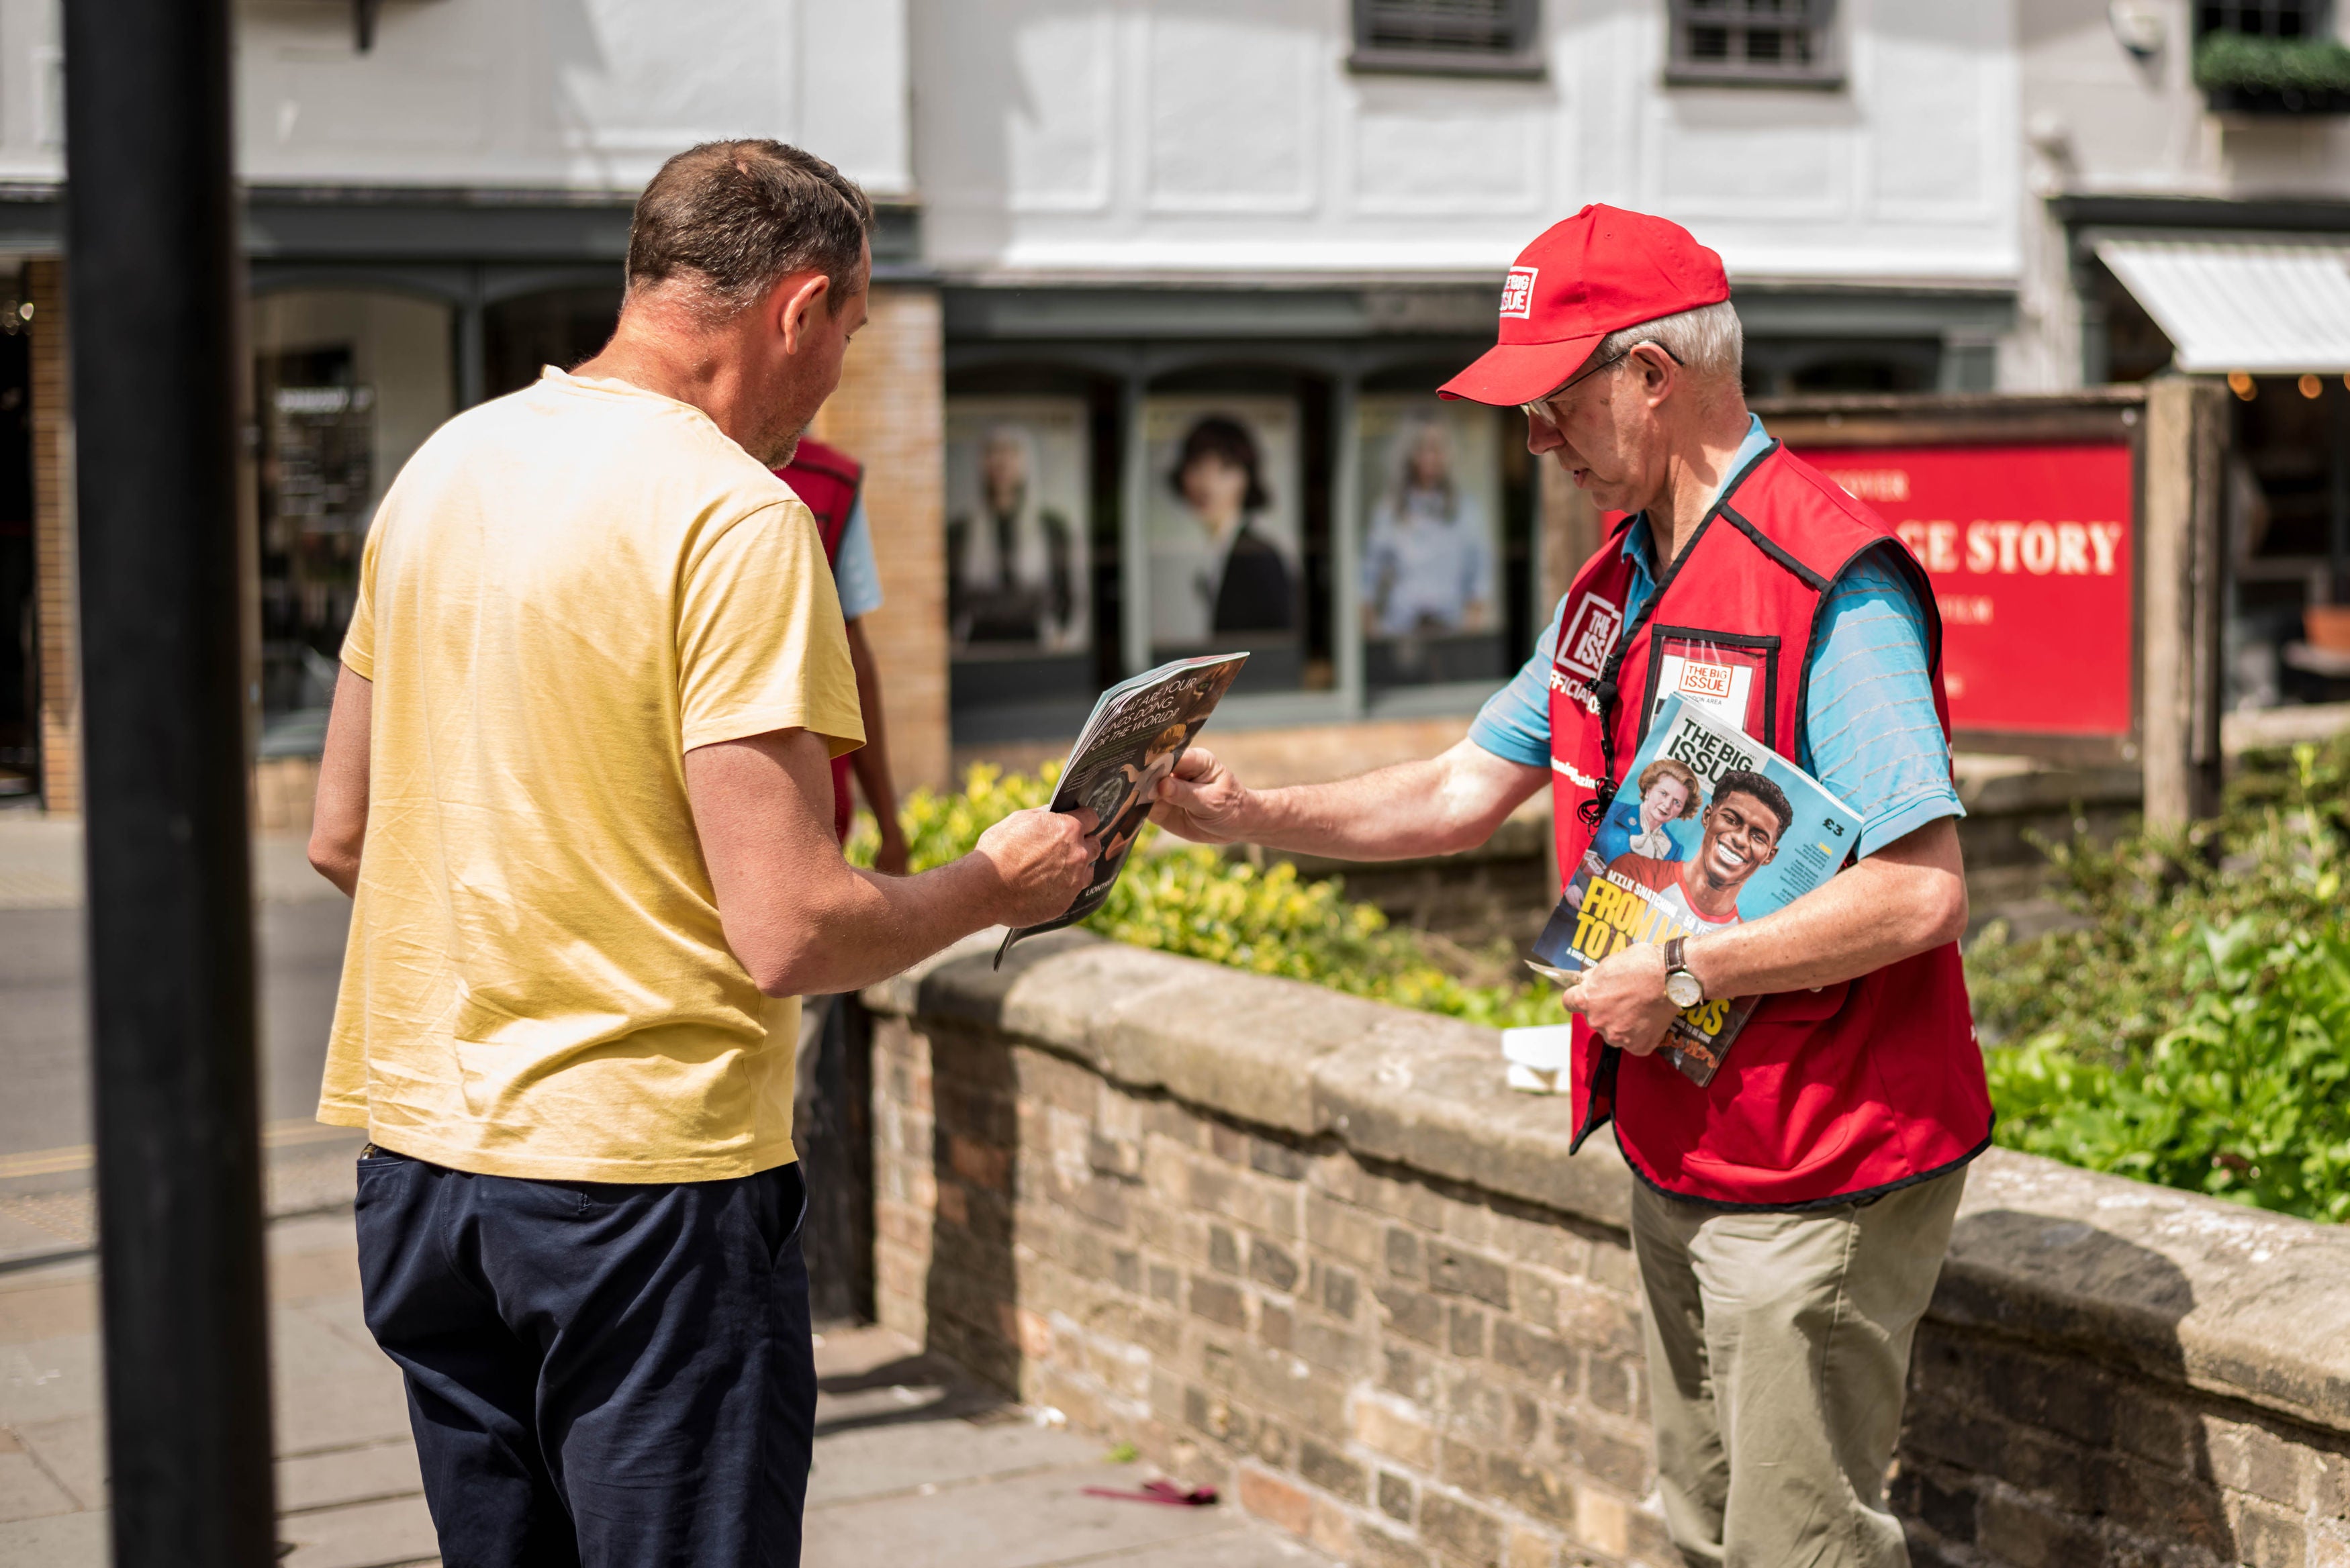 The Archbishop of Canterbury who has taken to the streets to get a taste of life as a Big Issue vendor